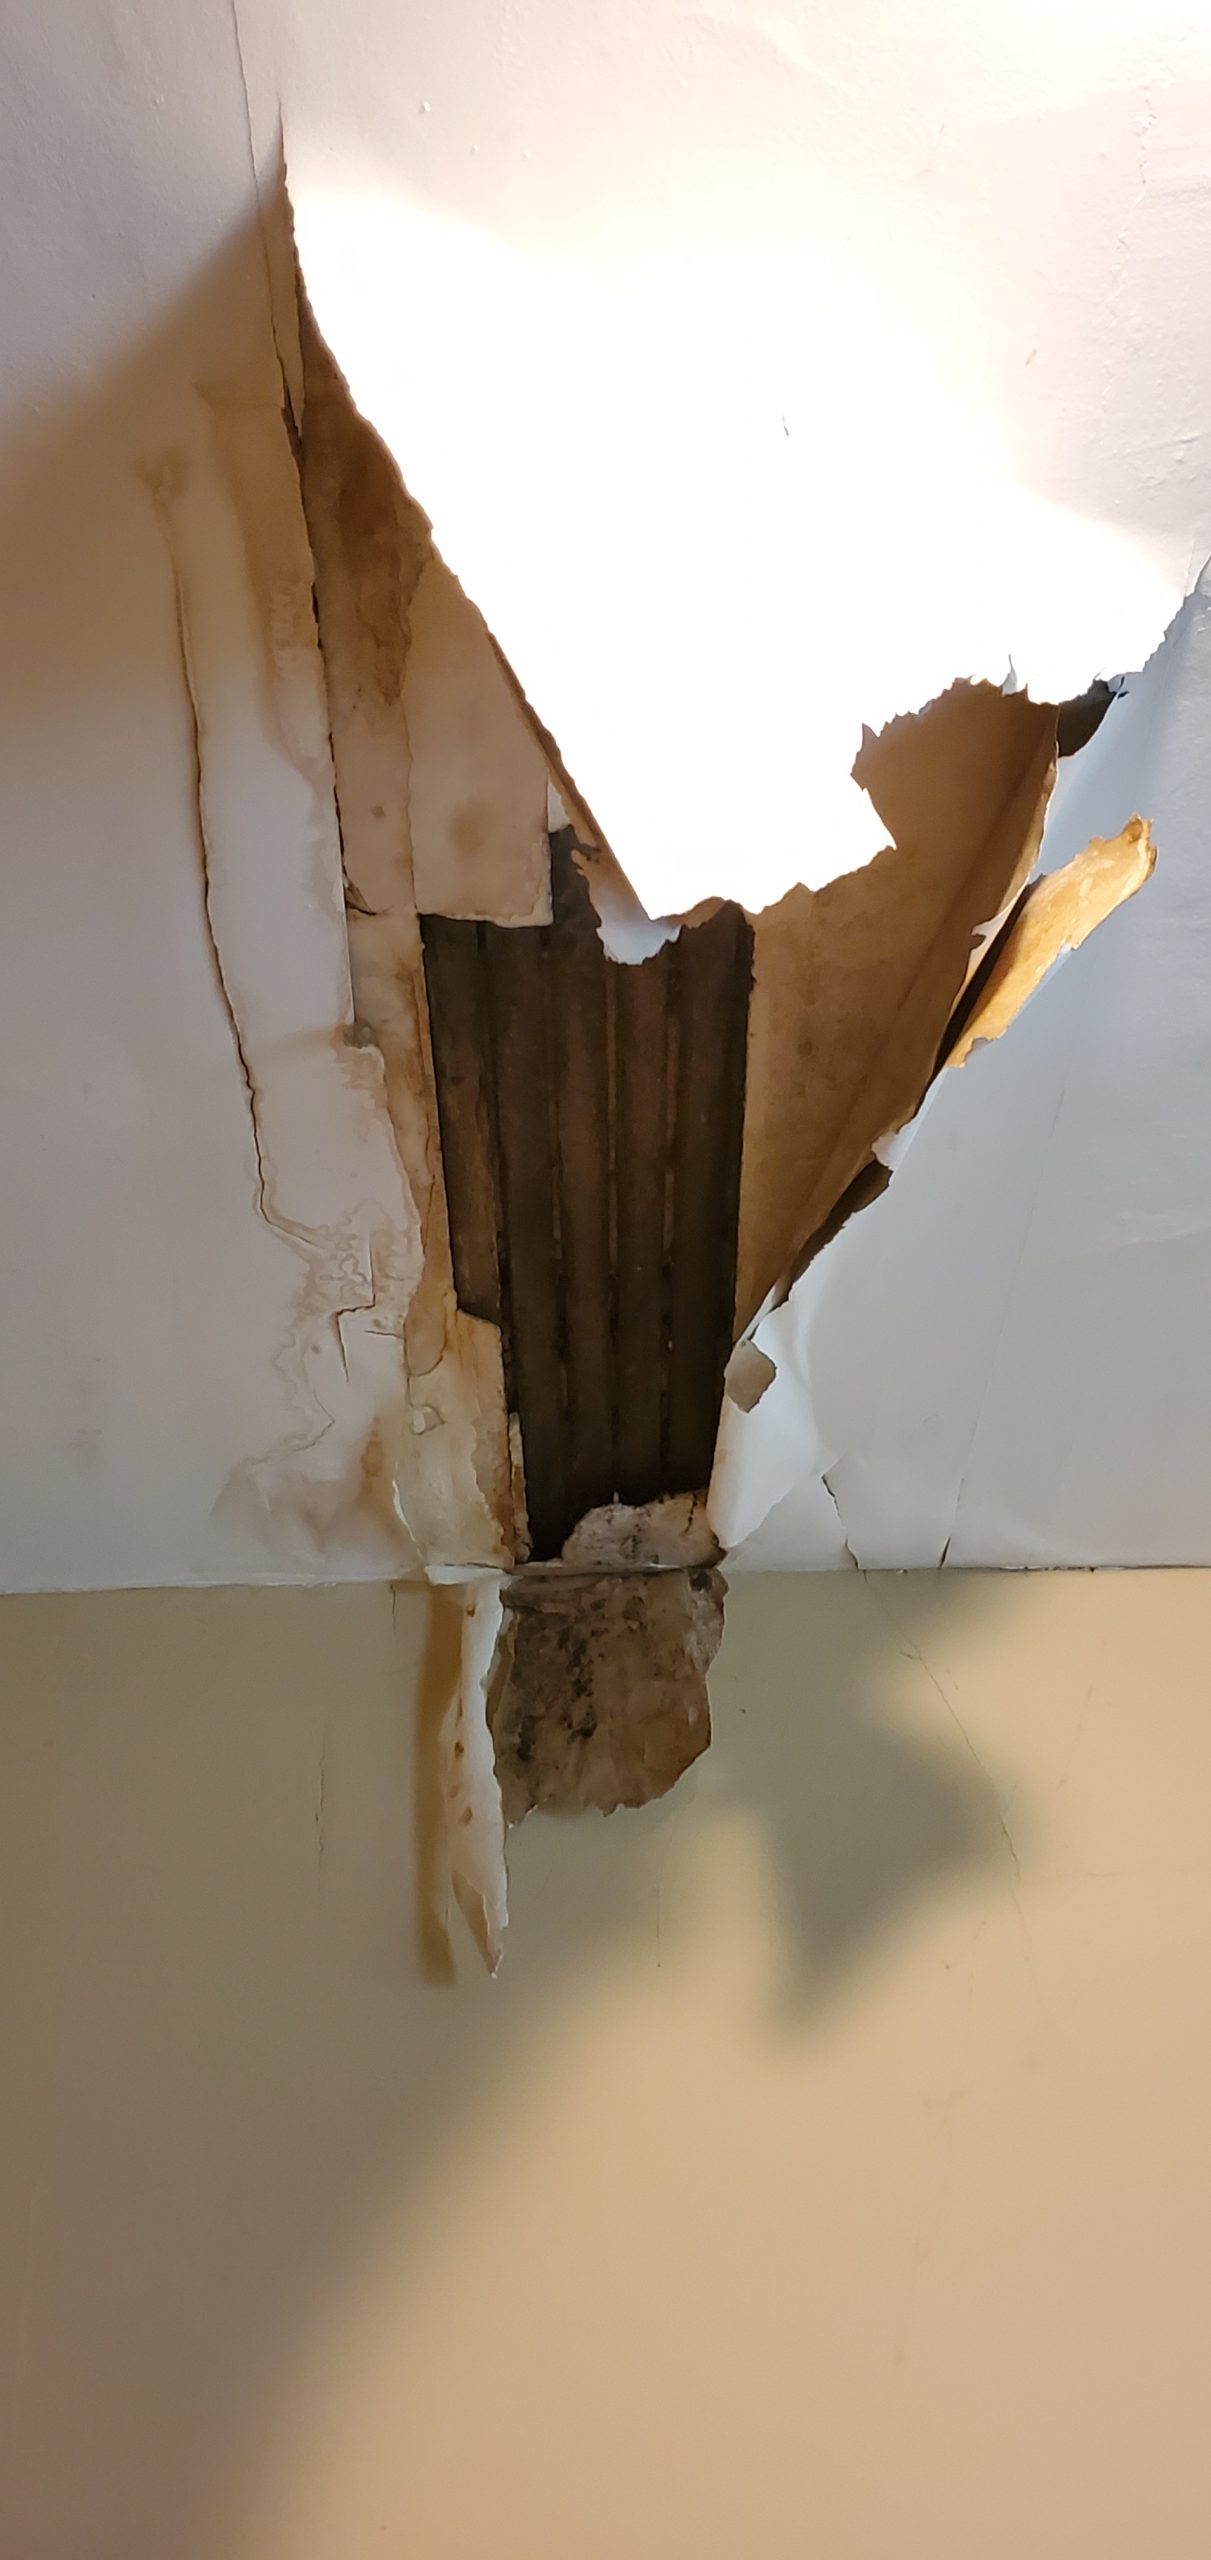 here is a roof leak that has caused drywall to fail and fall